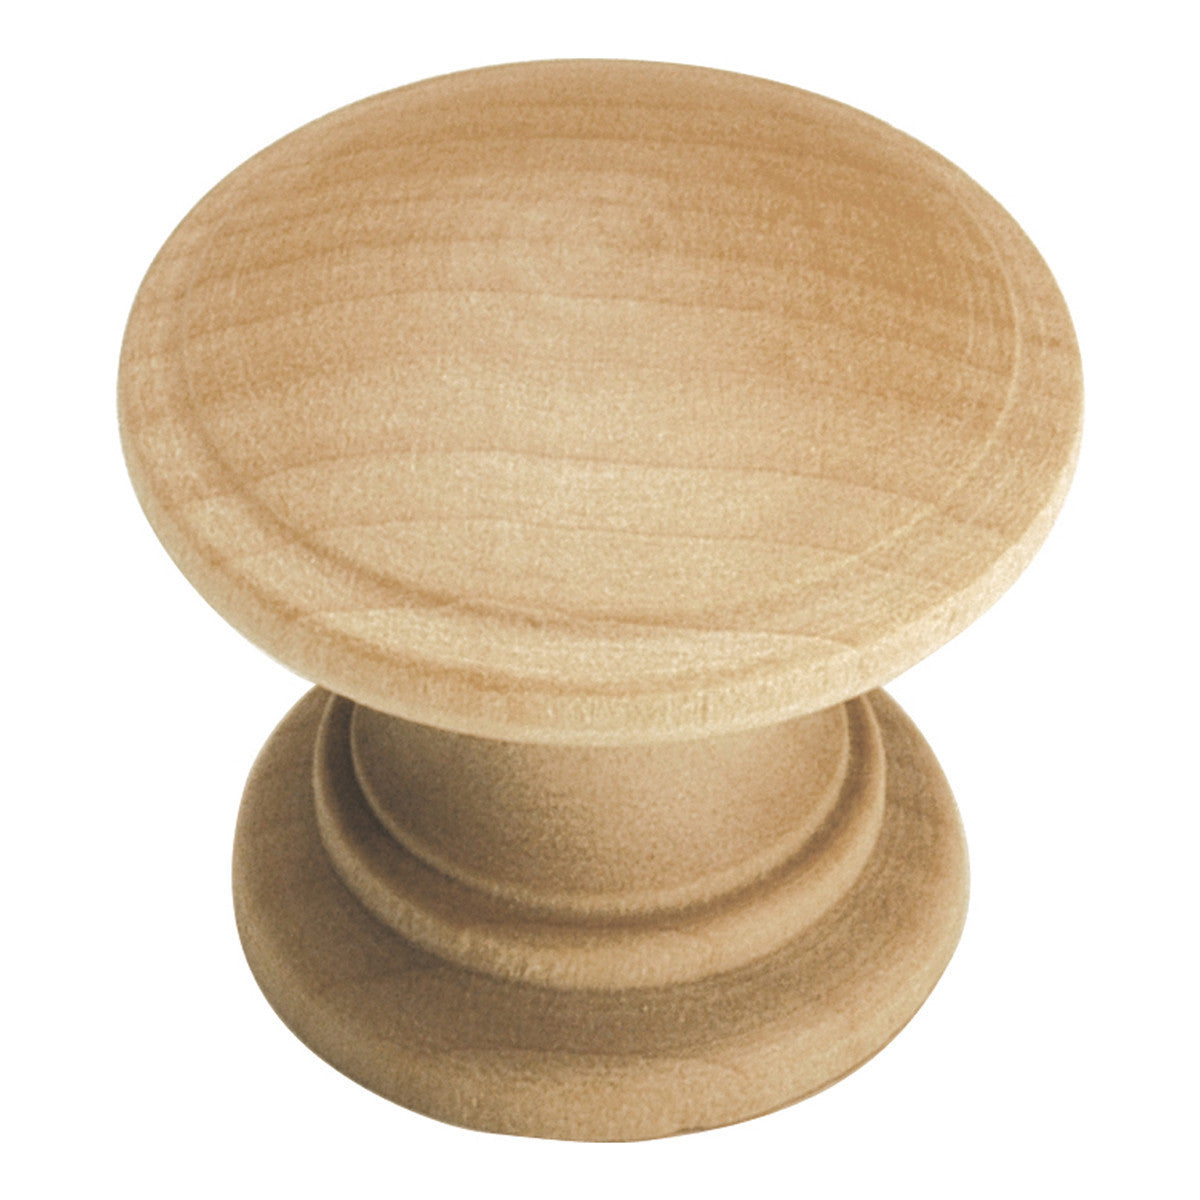 1 1 4 In Natural Woodcraft Unfinished Wood Cabinet Knob Hickory